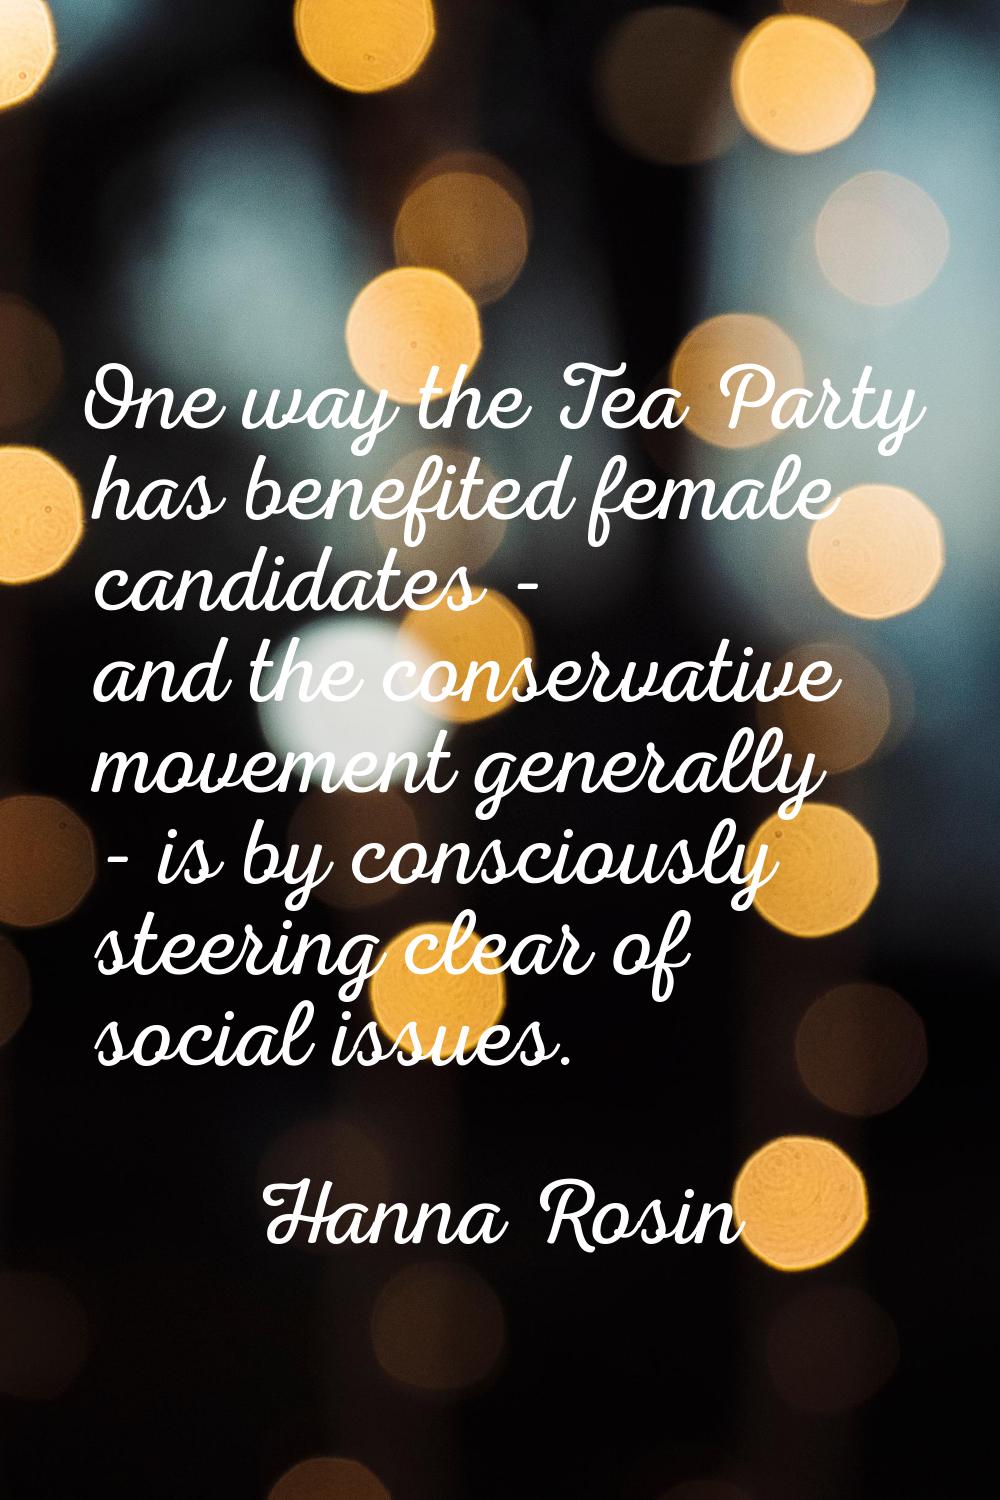 One way the Tea Party has benefited female candidates - and the conservative movement generally - i